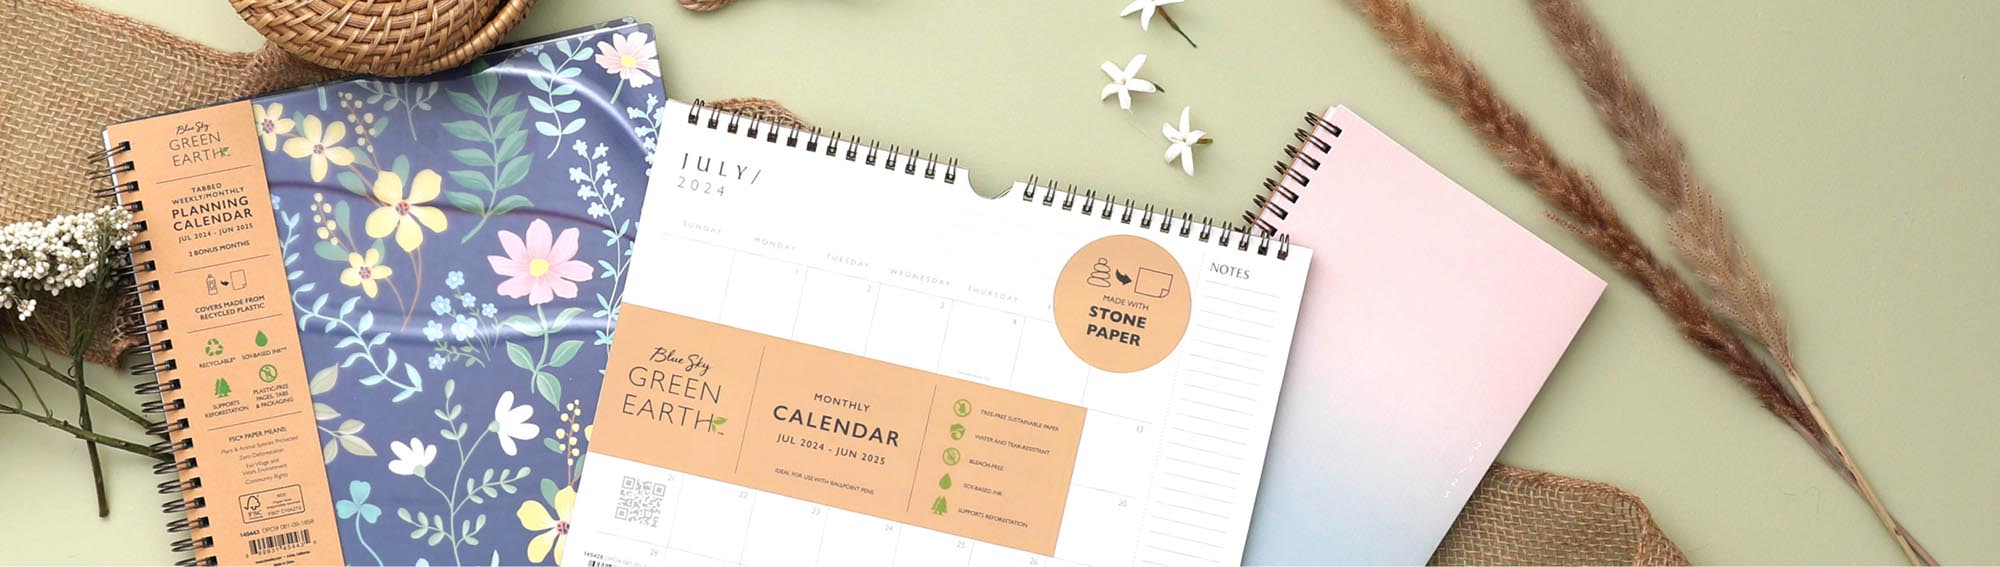 Blue Sky Green Earth planners and calendar on top of a flat-lay scene with floral